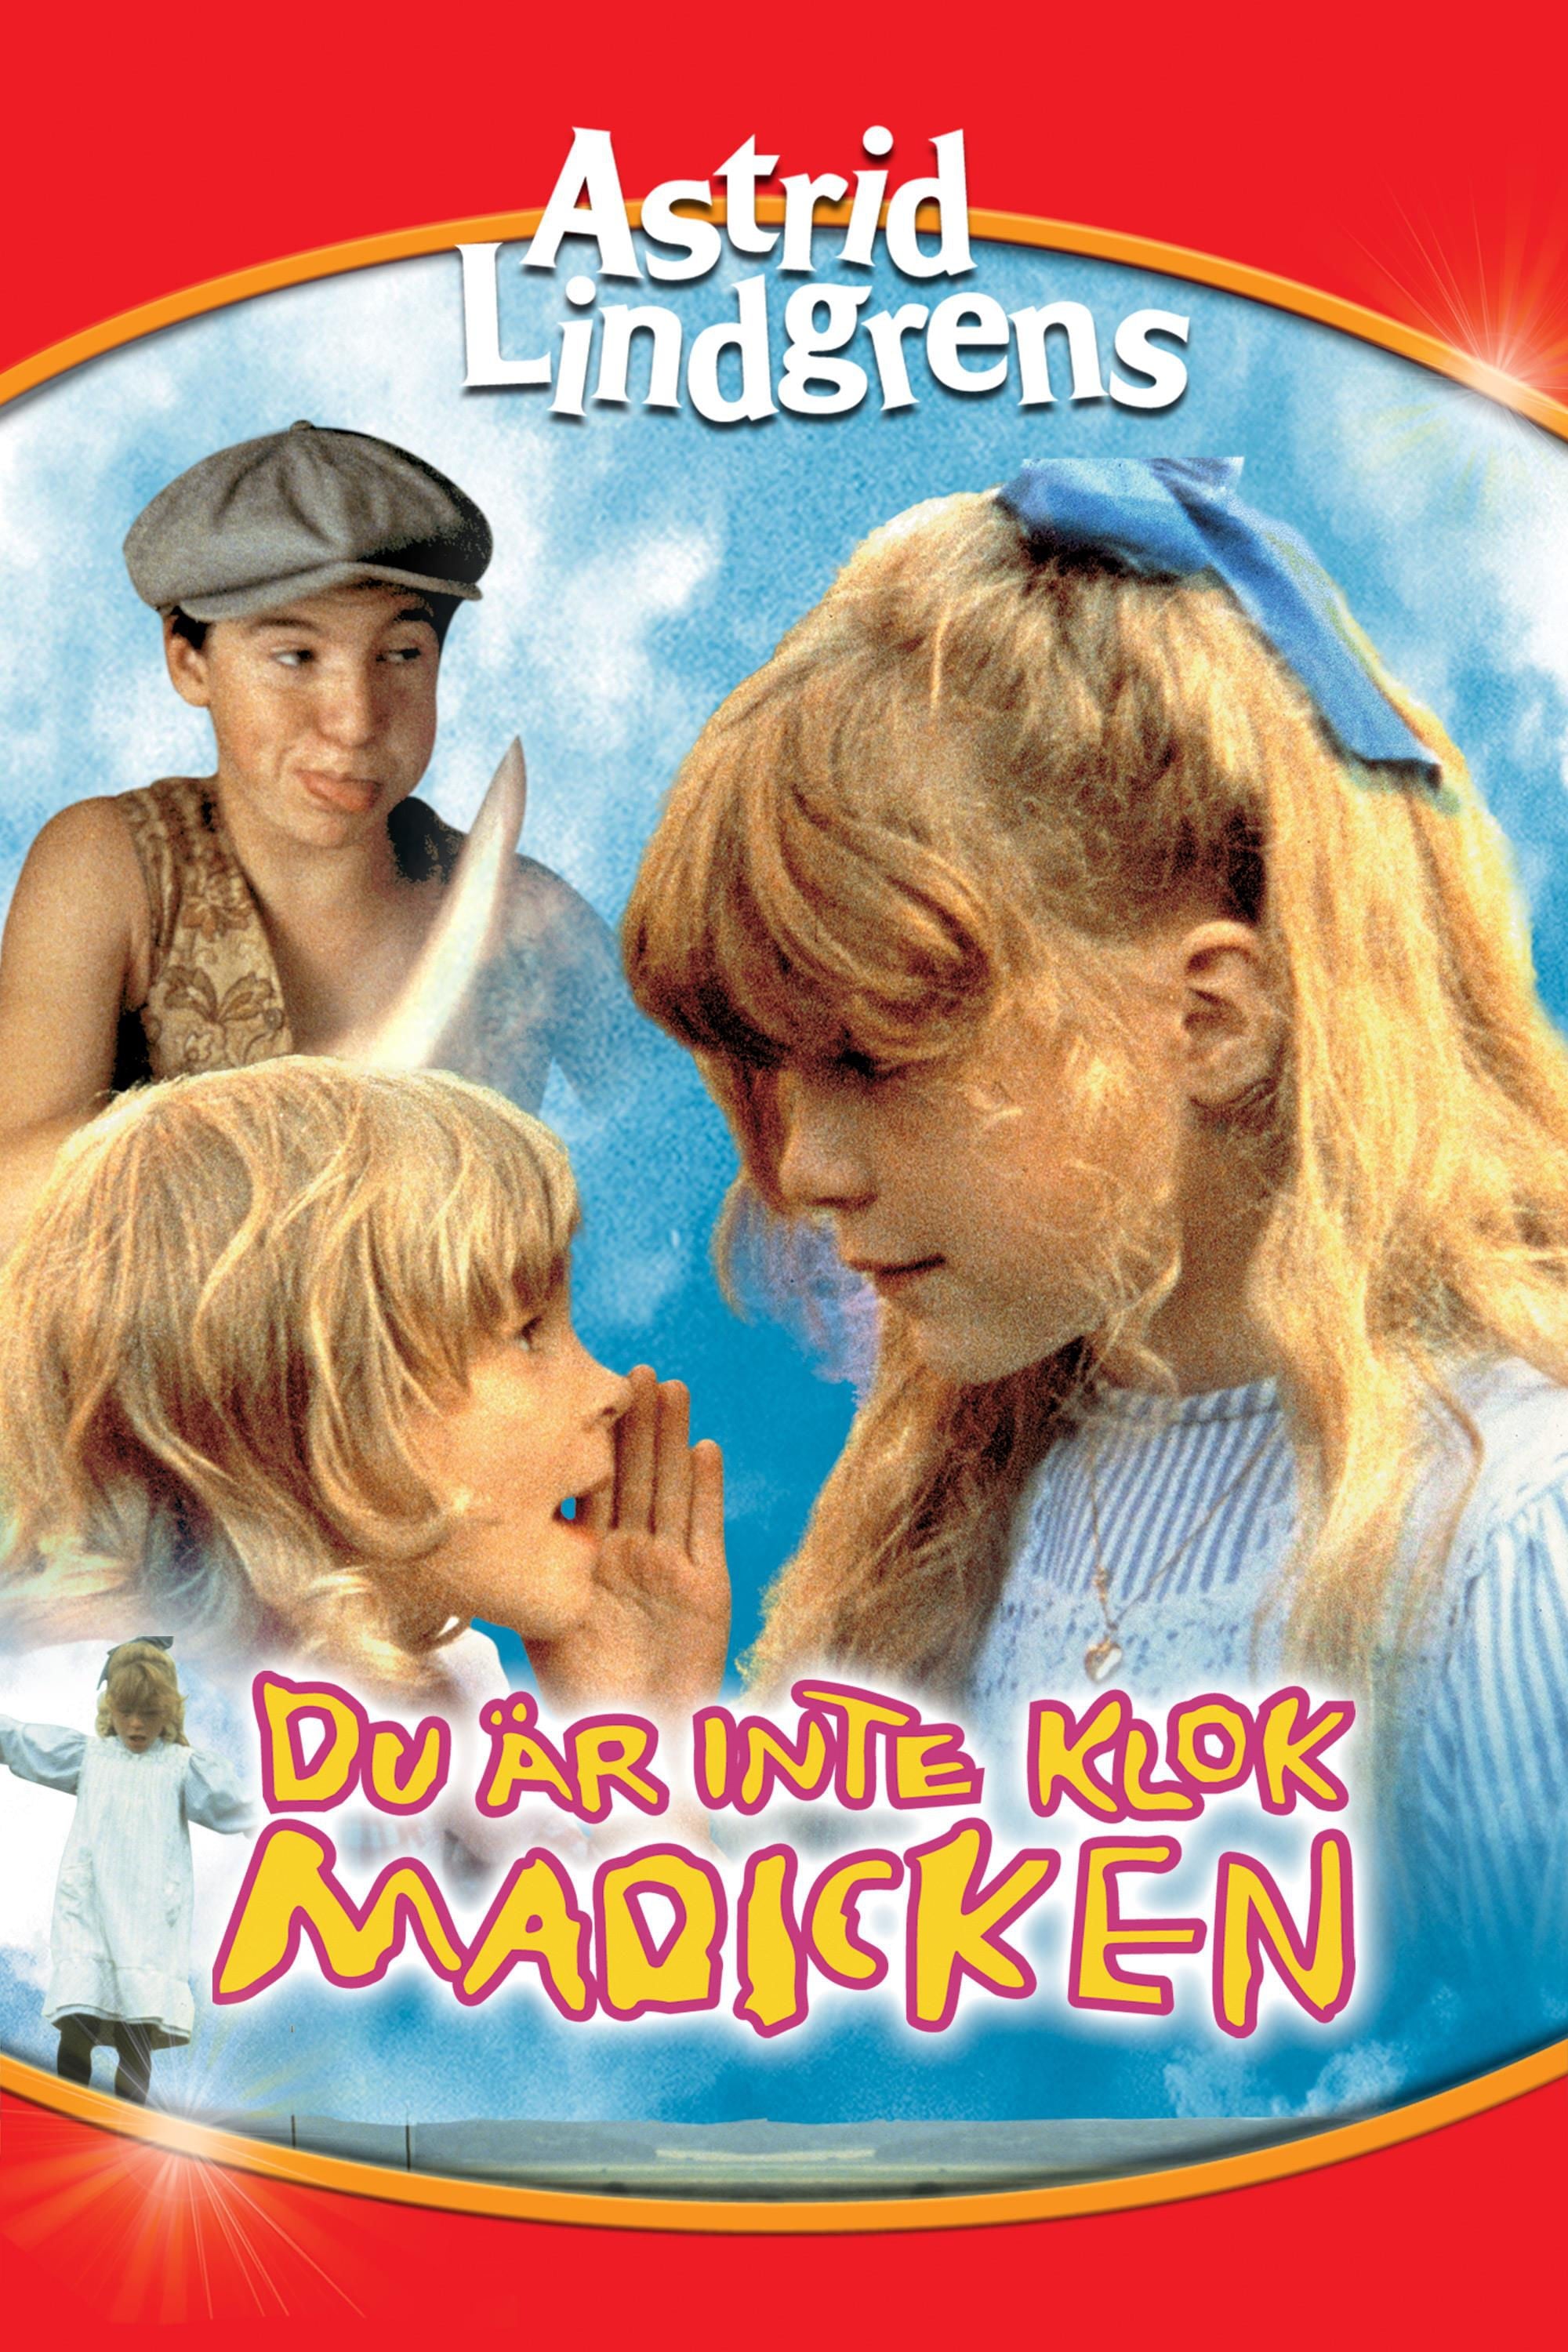 You're Out of Your Mind, Madicken (1979)